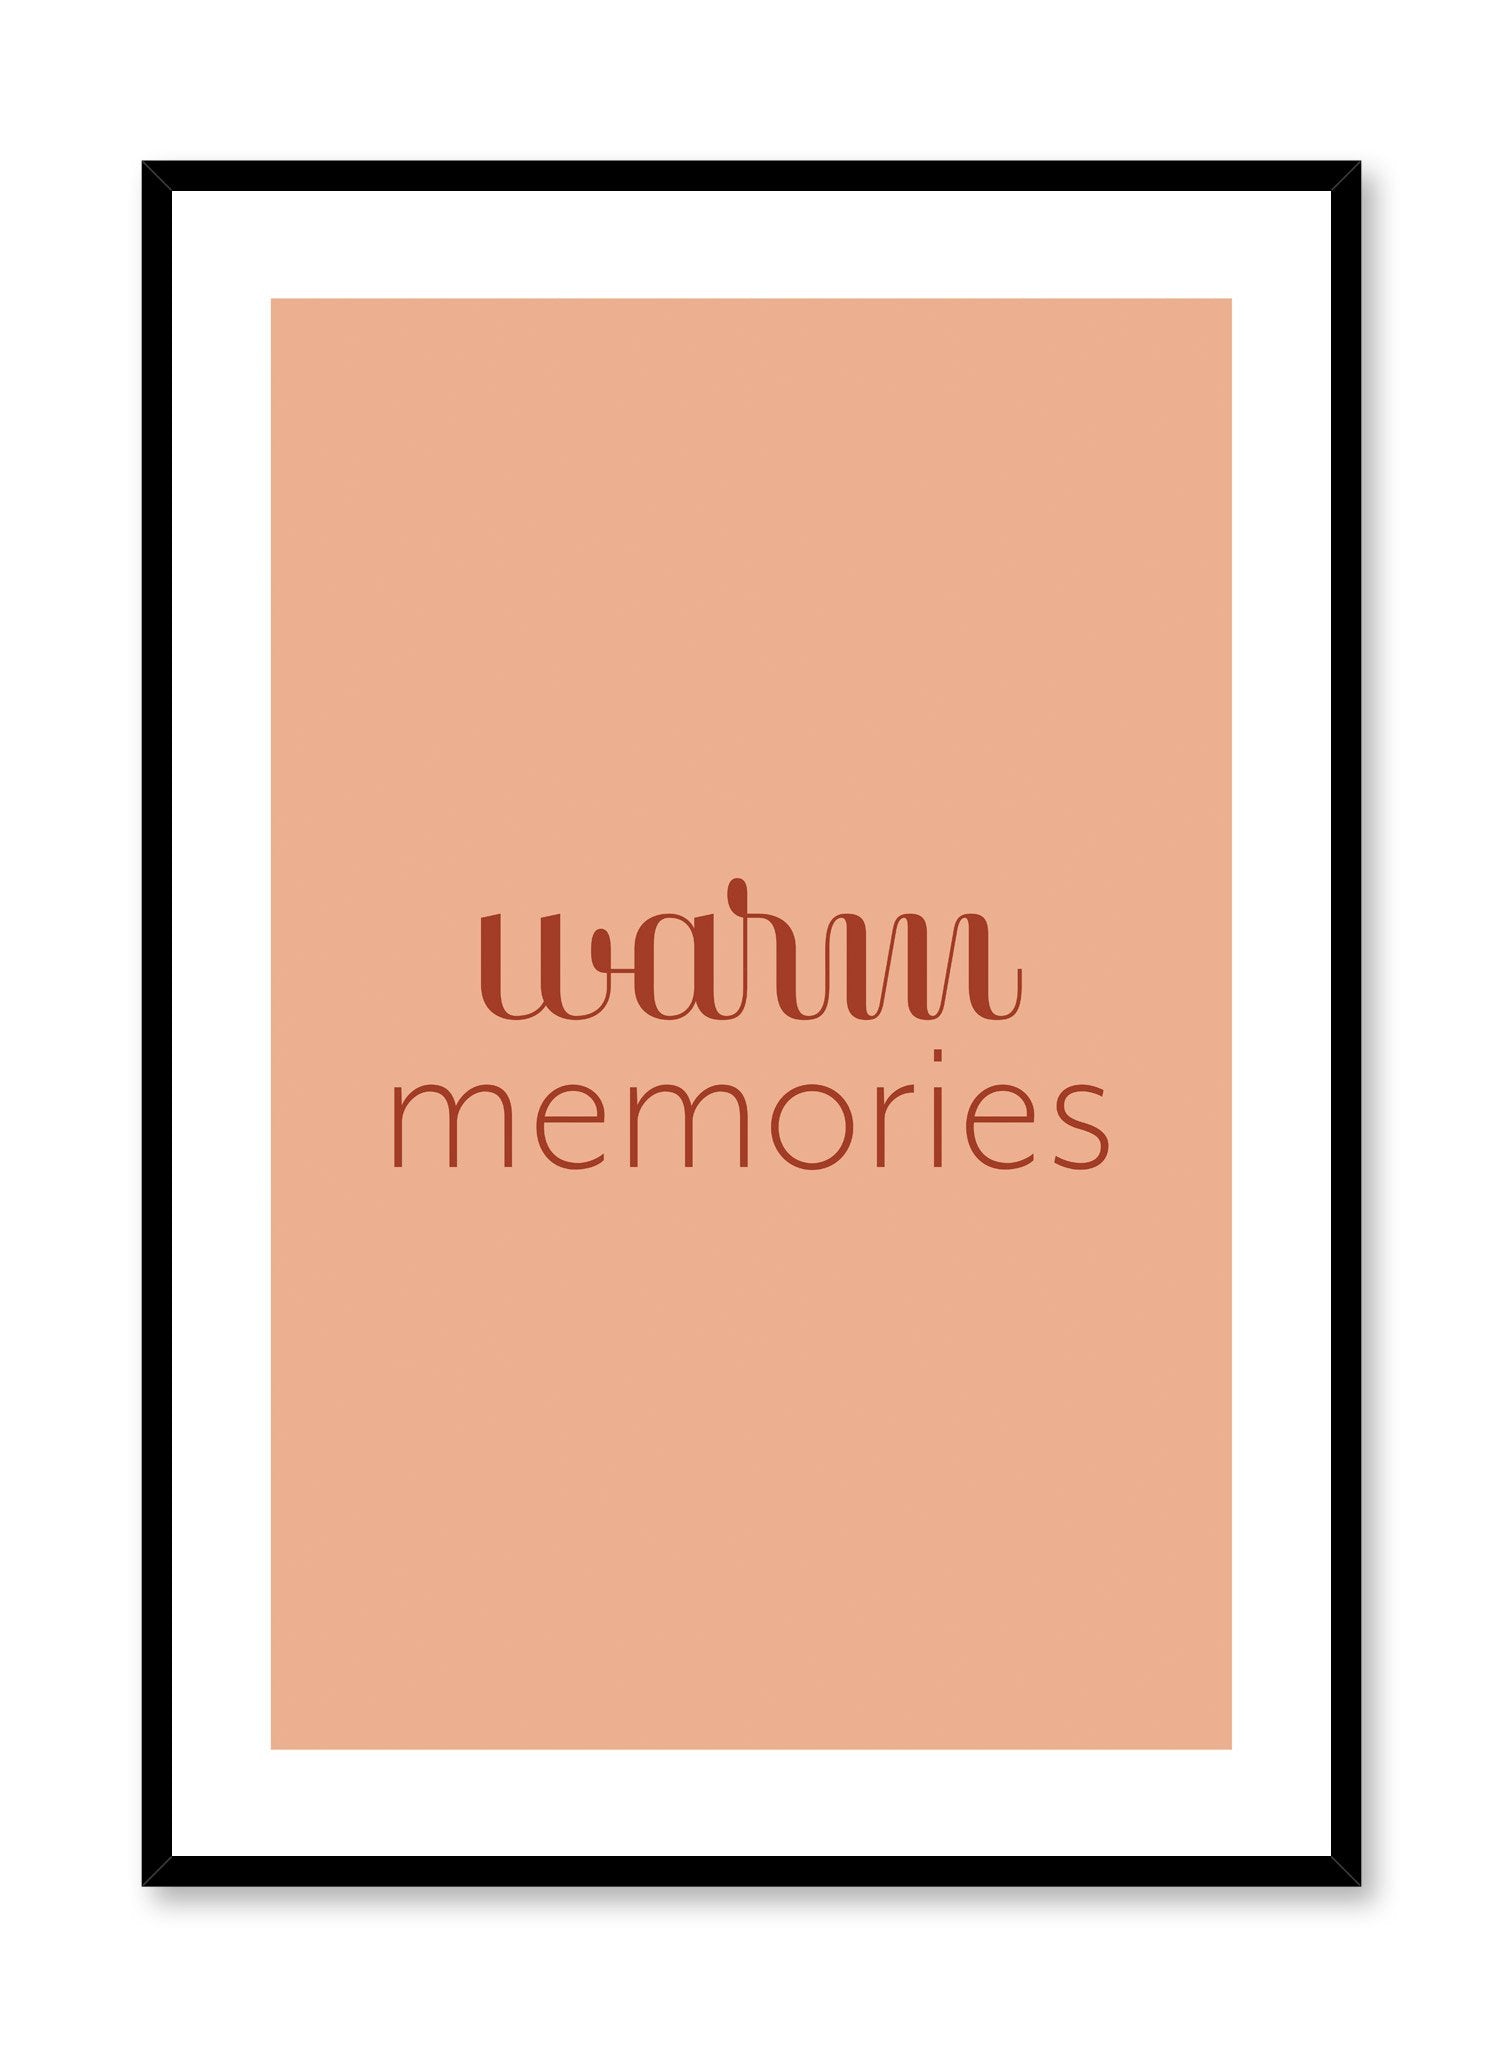 Minimalist typography poster by Opposite Wall with Warm Memories quote in orange